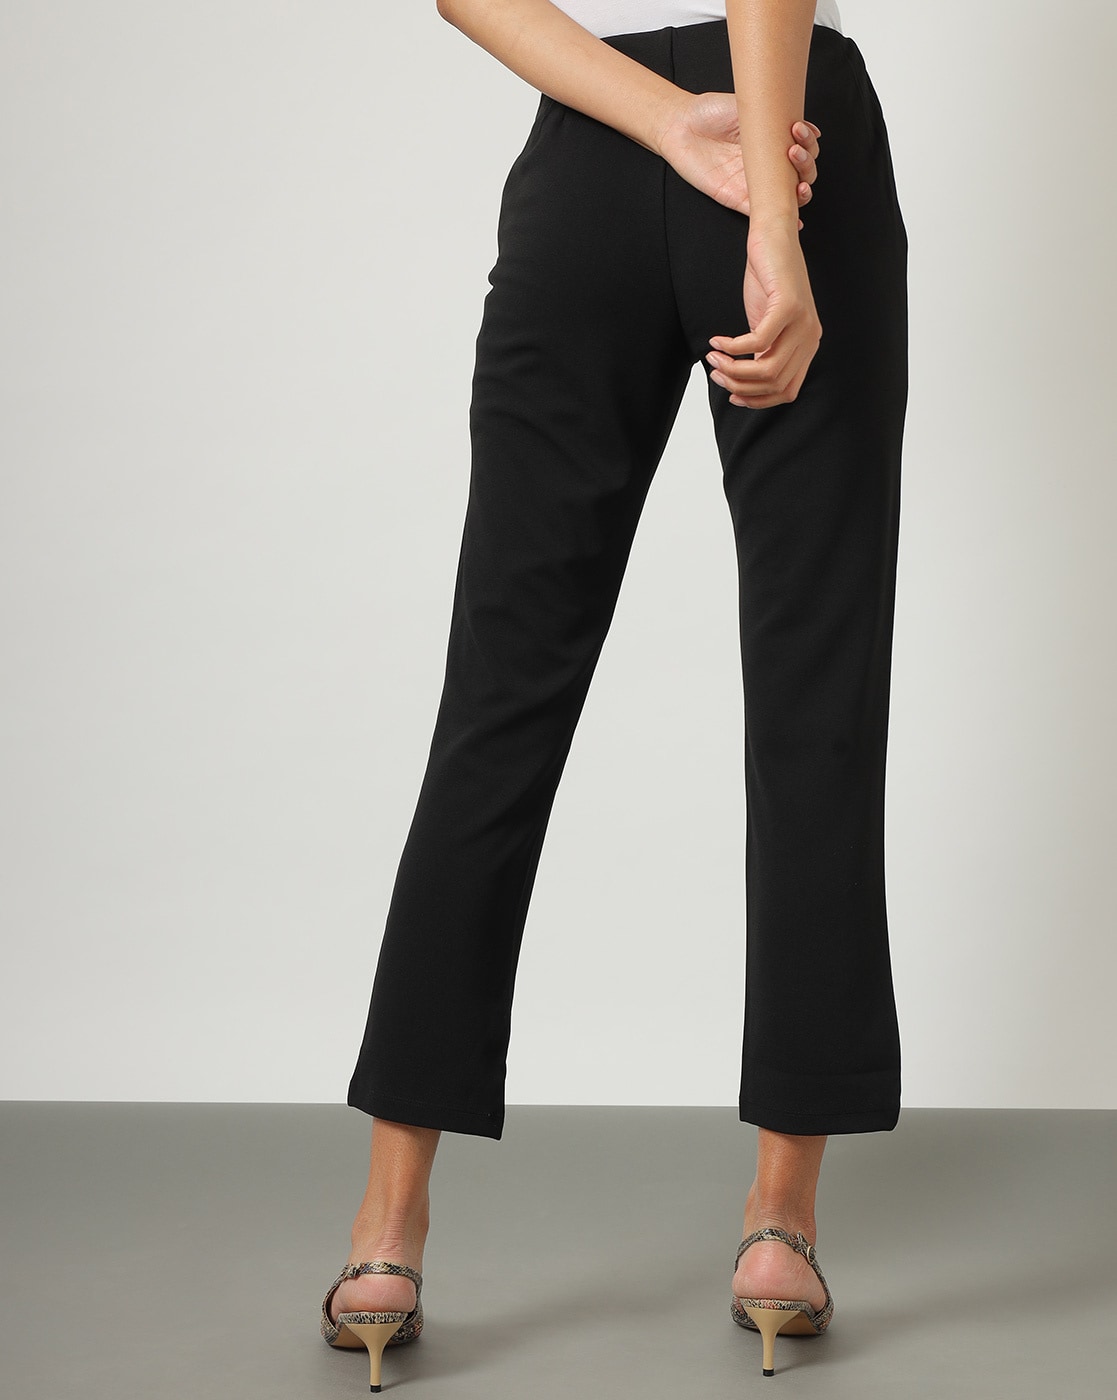 Topshop bengaline high waisted slim flare trouser with side zips in black   ASOS